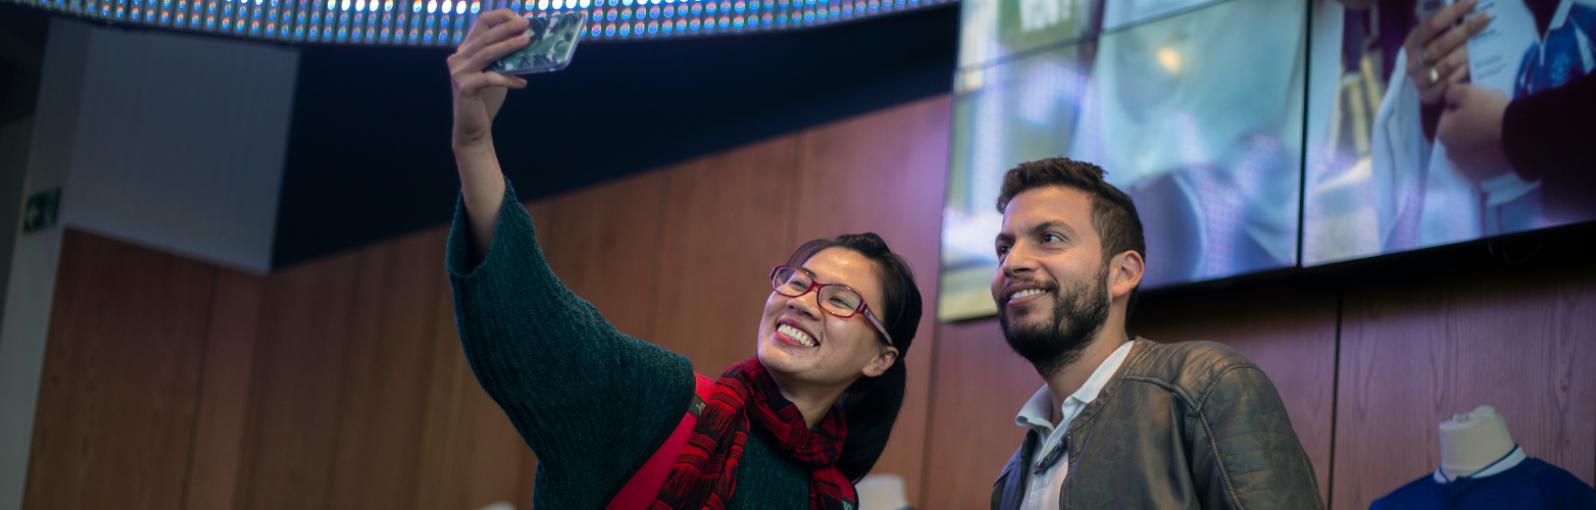 Two international salford students taking a selfie